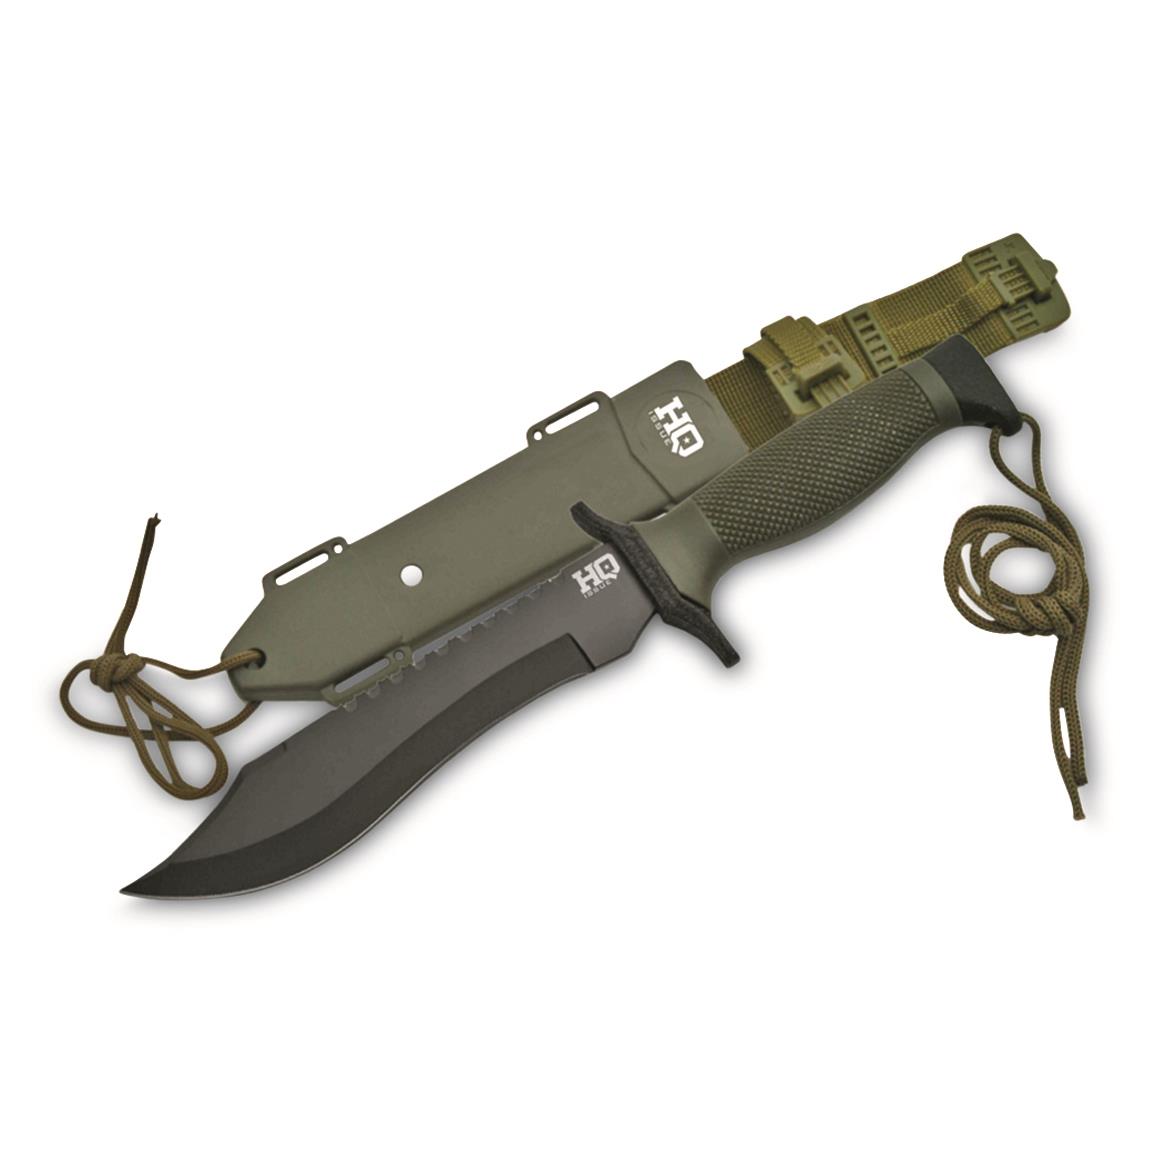 HQ ISSUE 12" Tactical Sawback Fixed Blade Knife, Olive Drab